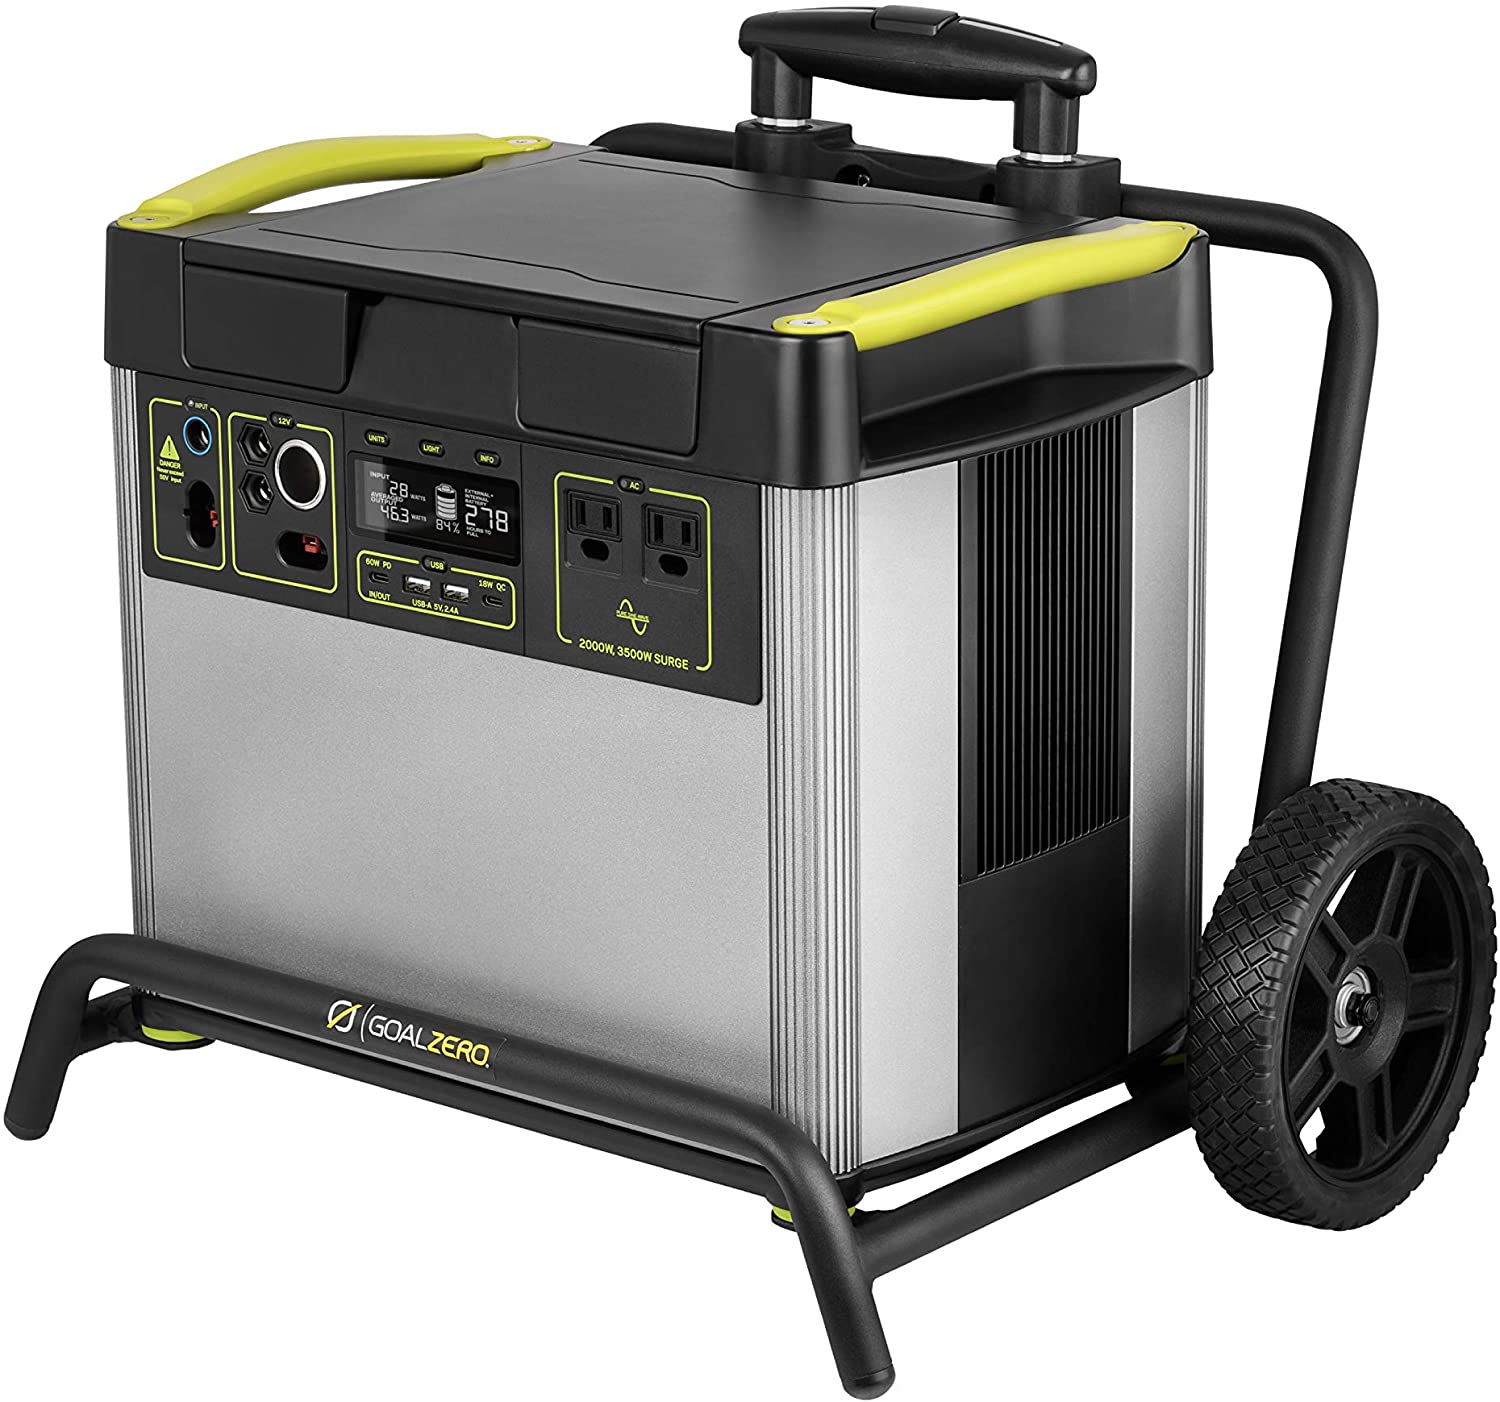 5 Best Portable Standby Solar Home Generator Reviews & Buying Guide WWPN